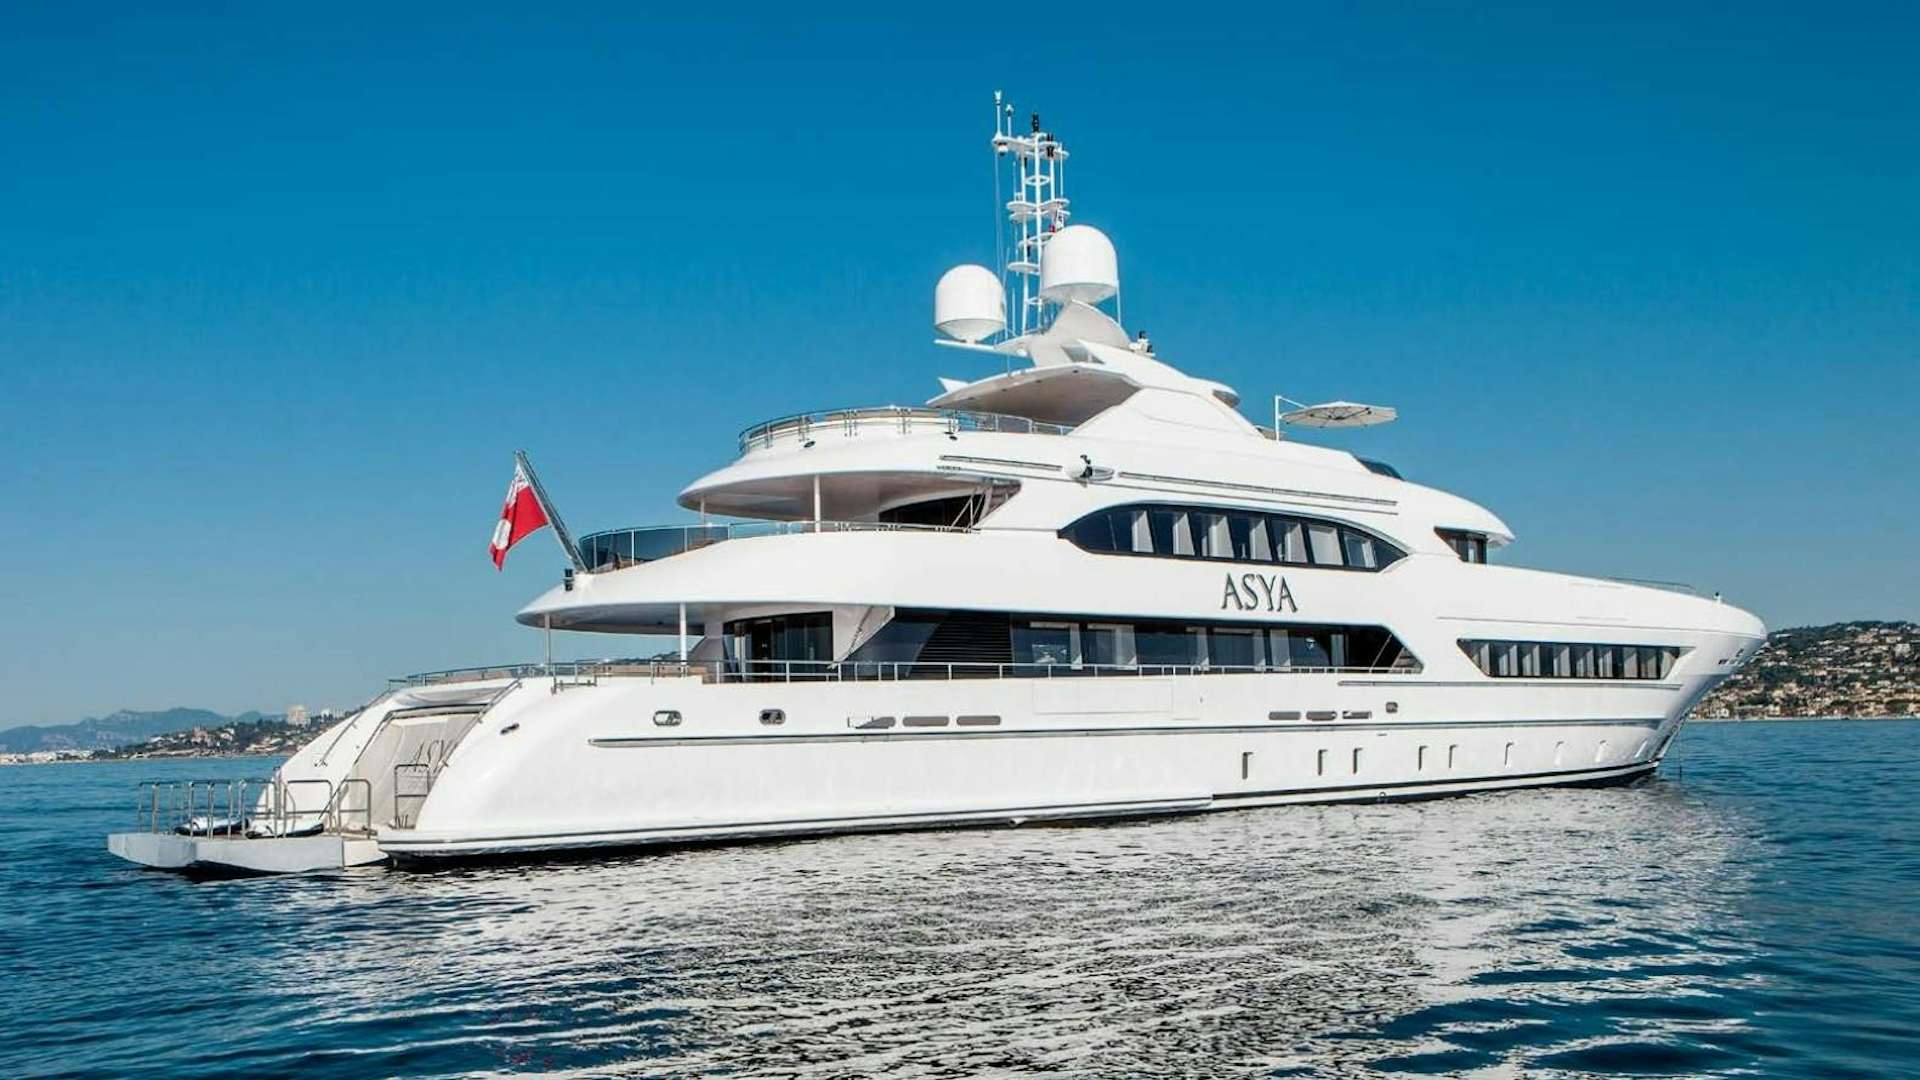 Watch Video for ASYA Yacht for Sale